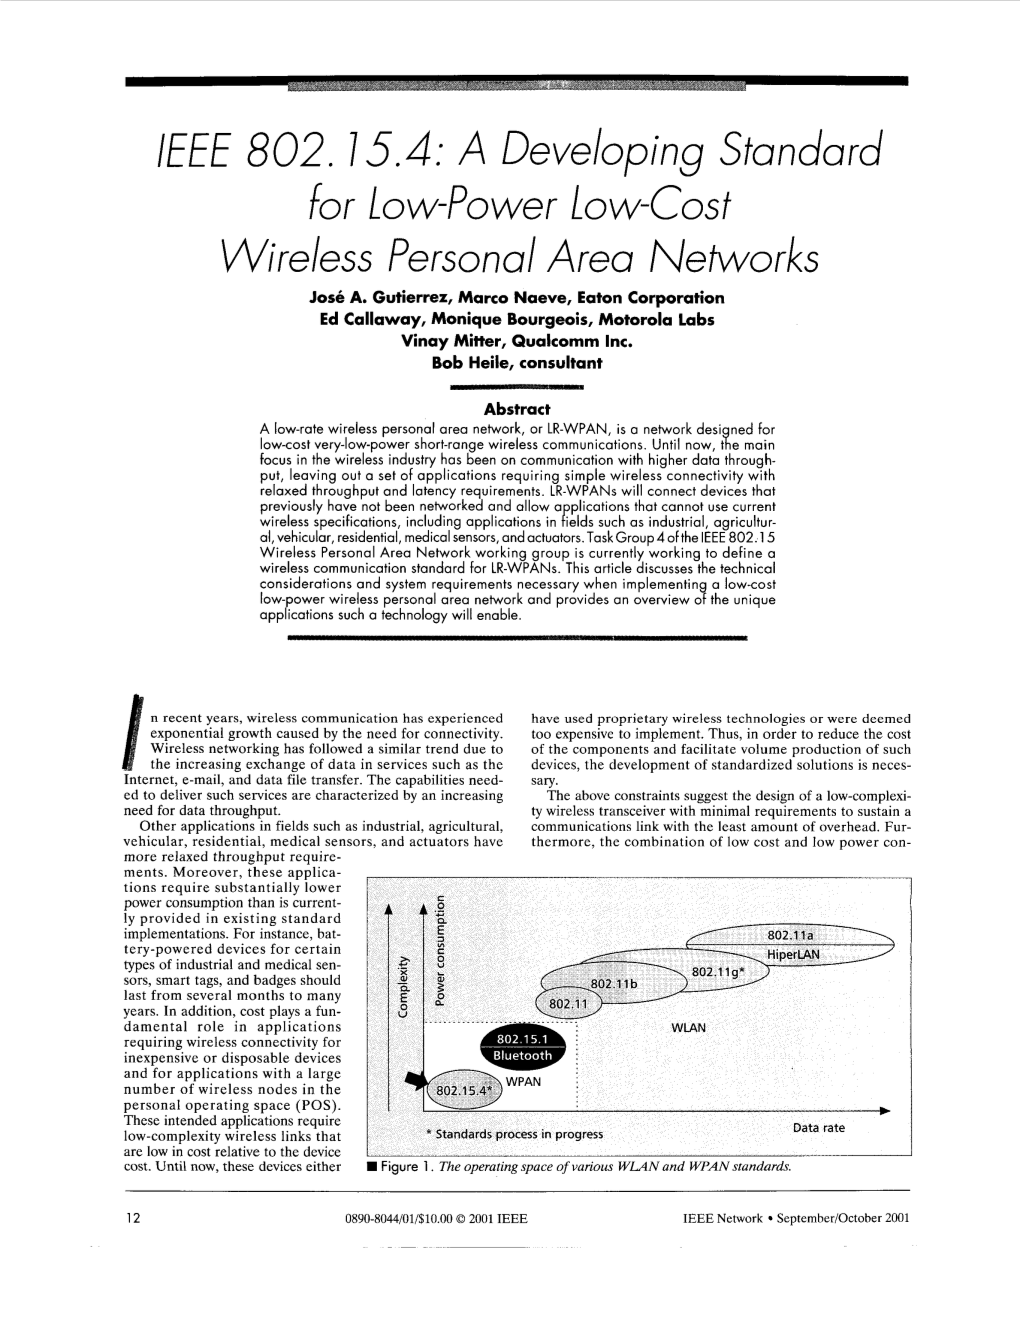 IEEE 802.1,5.4: a Developing Standard for Low-Power Low-Cost Wireless Personal Area Networks